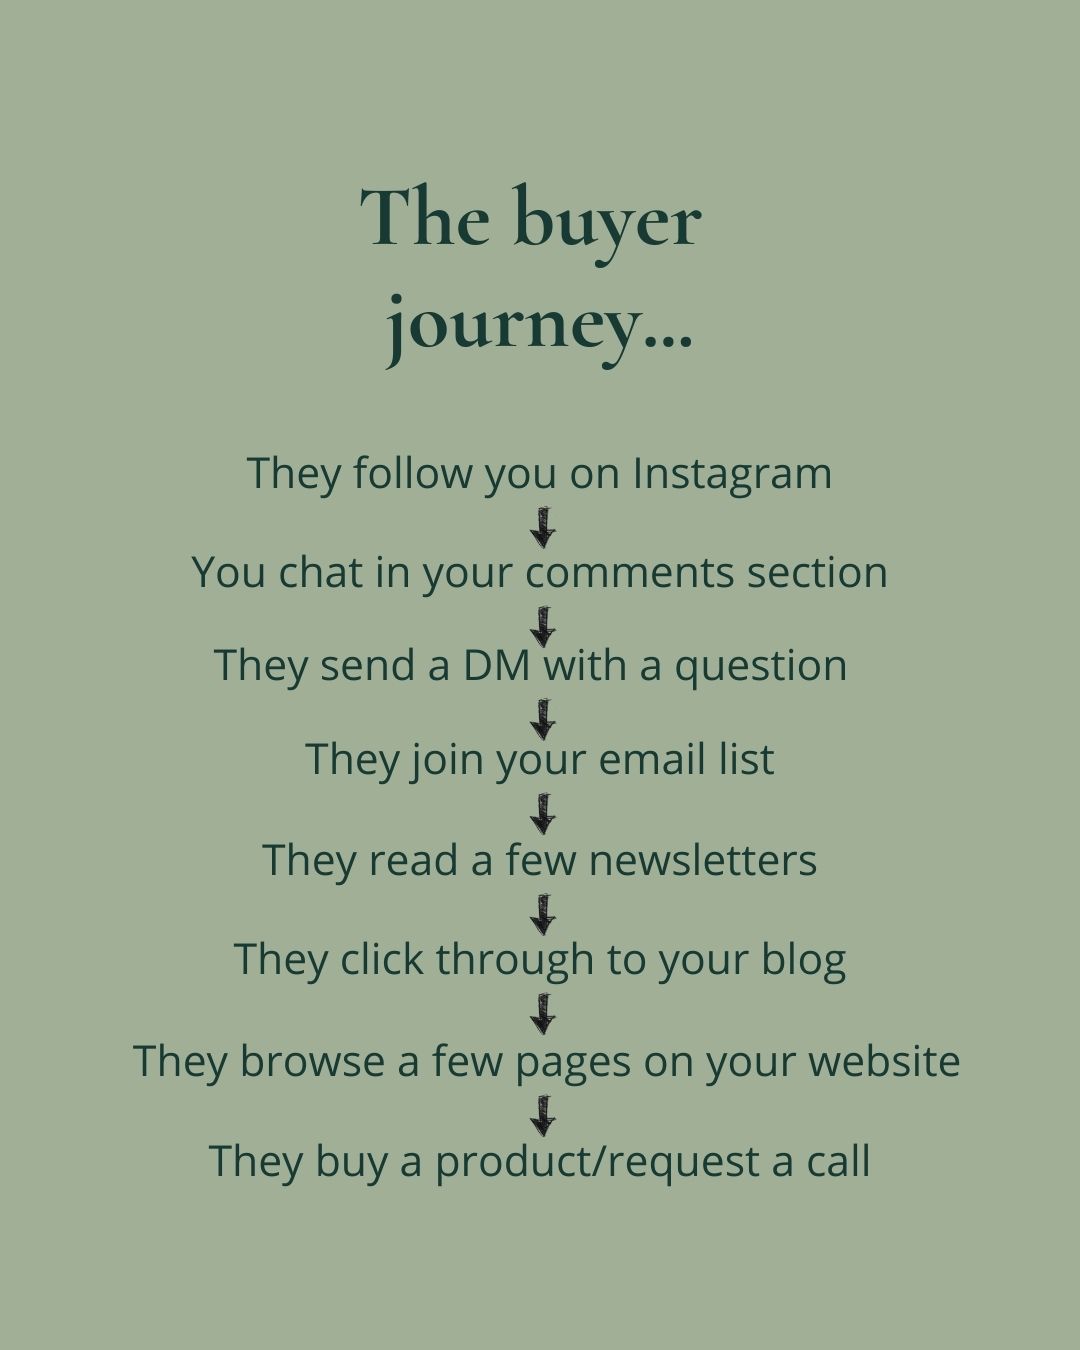 The buyer journey for slow marketing